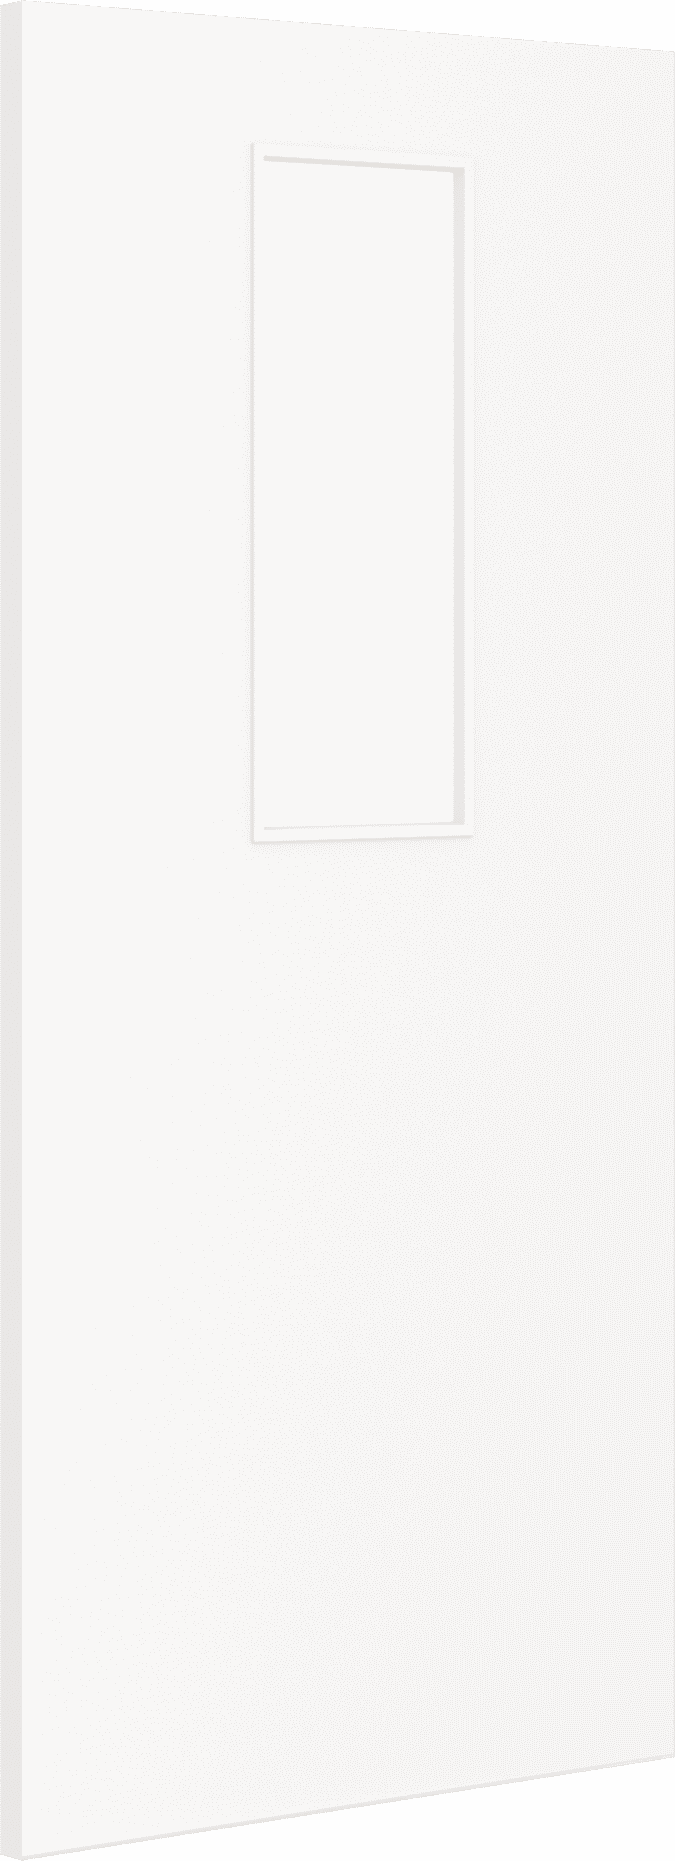 1981mm x 686mm x 44mm (27") Architectural Paint Grade White 14 Clear Glazed Fire Door Blank